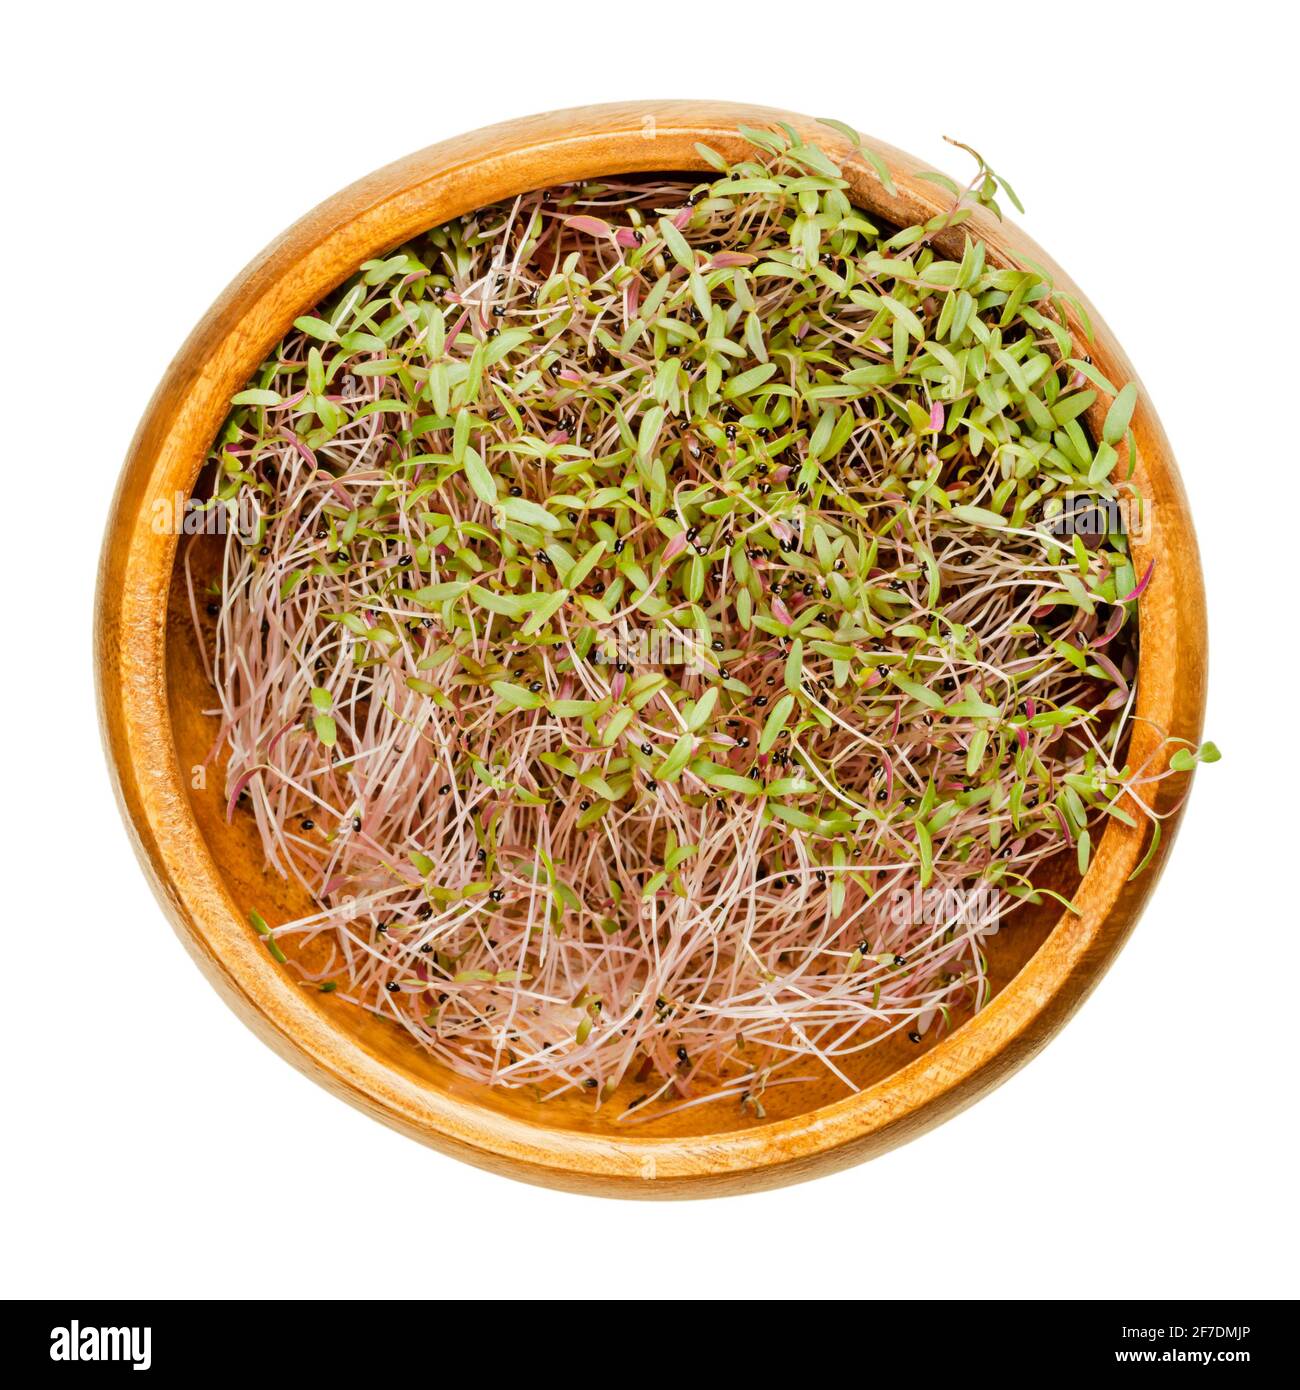 Amaranth sprouts in wooden bowl. Ready to eat Amaranthus microgreens. Green shoots, seedlings, young plants and leaves, used as garnish or ingredient. Stock Photo